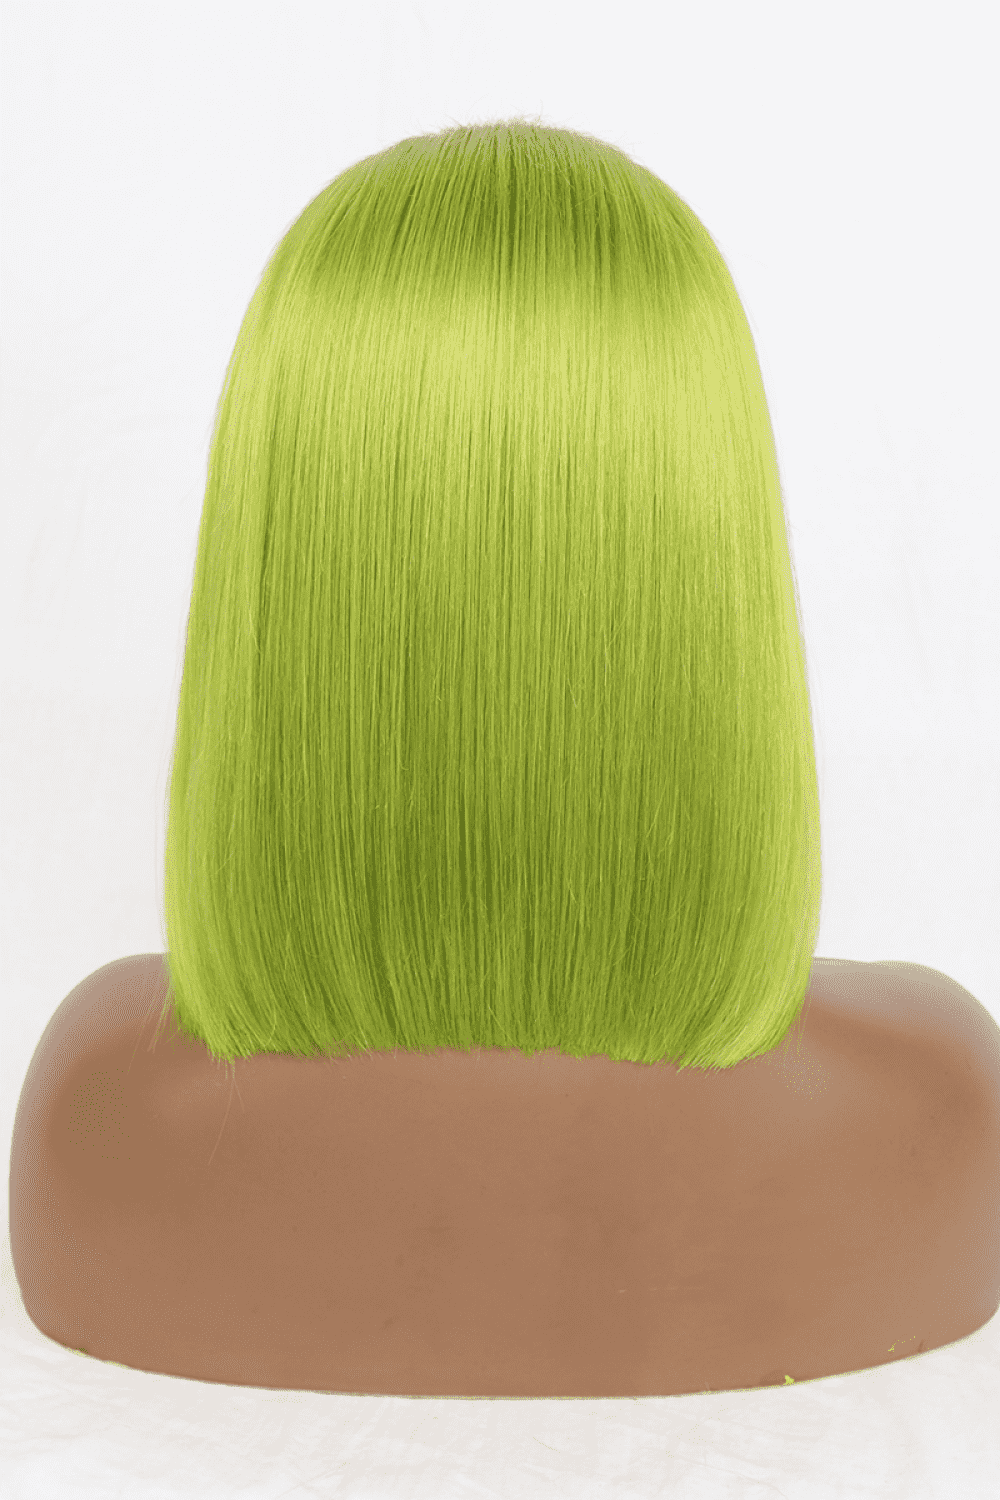 a wig with bright green hair on a mannequin head